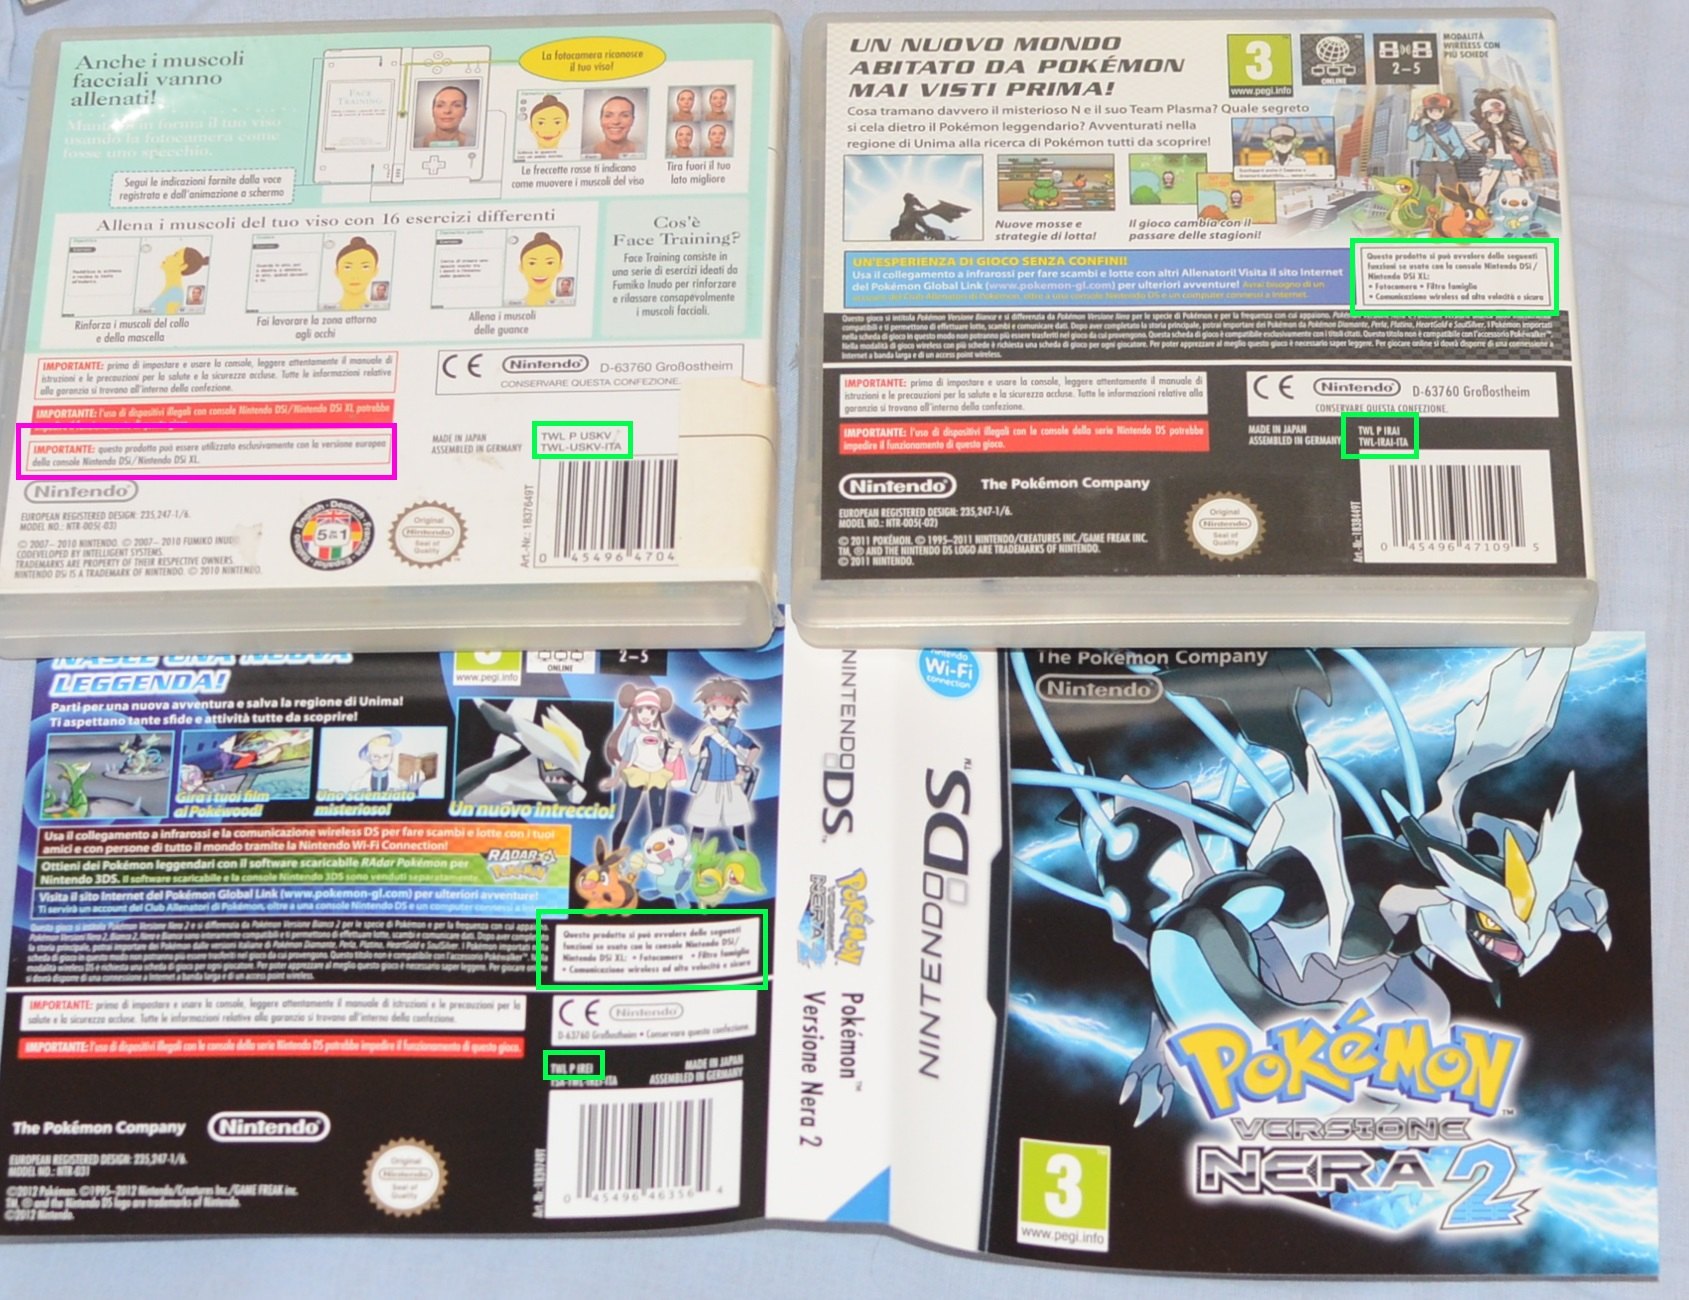 Pokemon Black and White- Which starter? - Nintendo DS, DSi & DSiWare Forum  - Page 1